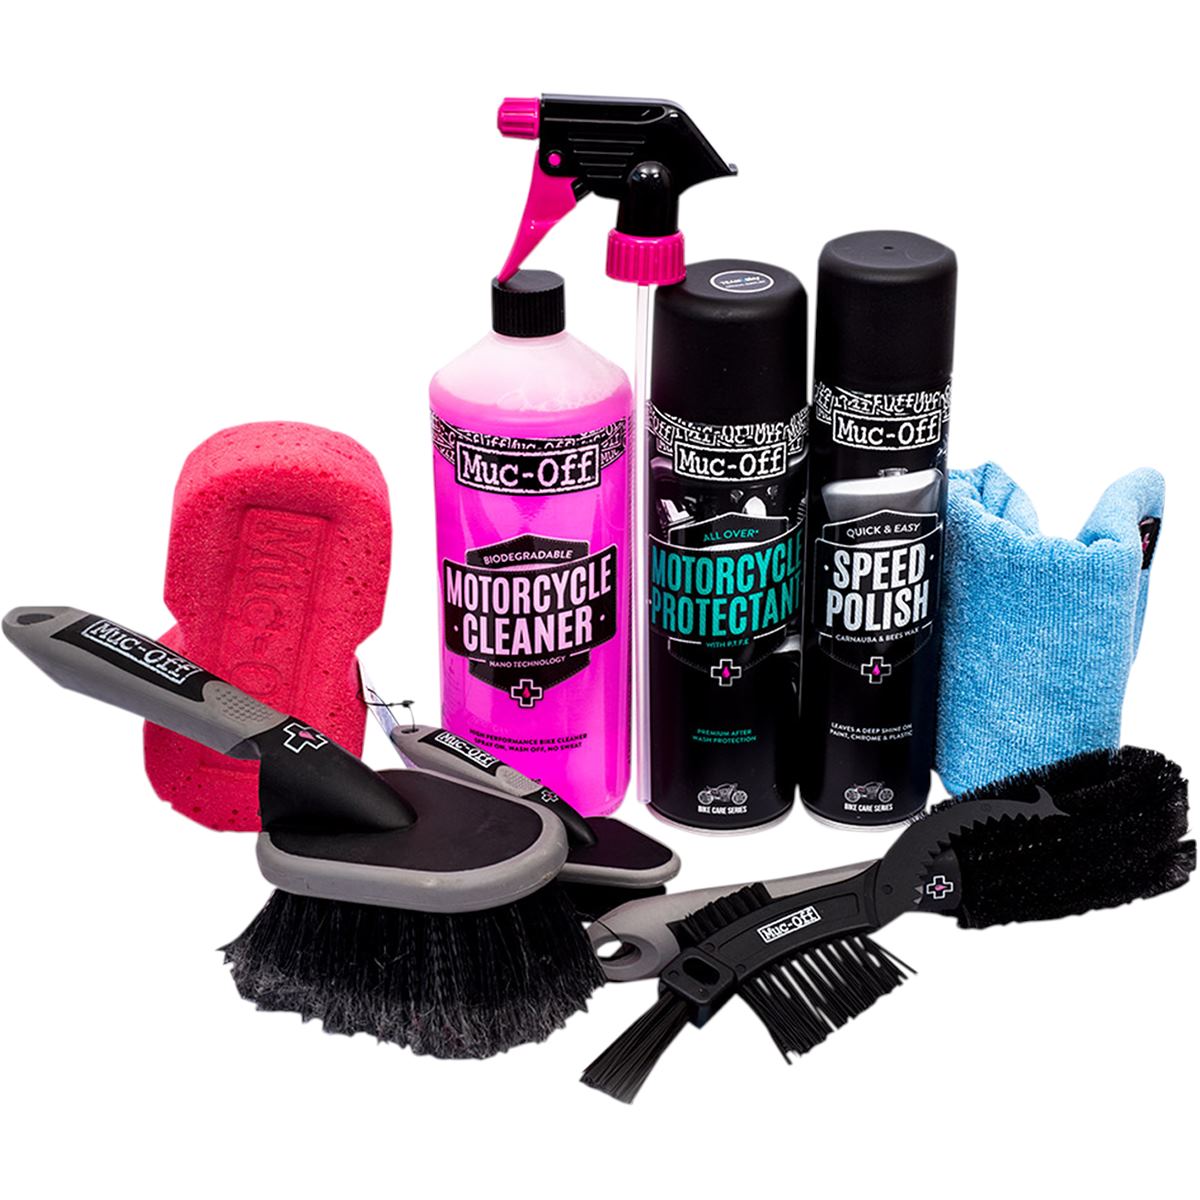 Muc-Off Bike Cleaner Ultimate Moto Kit 9 pieces, incl. Tool box